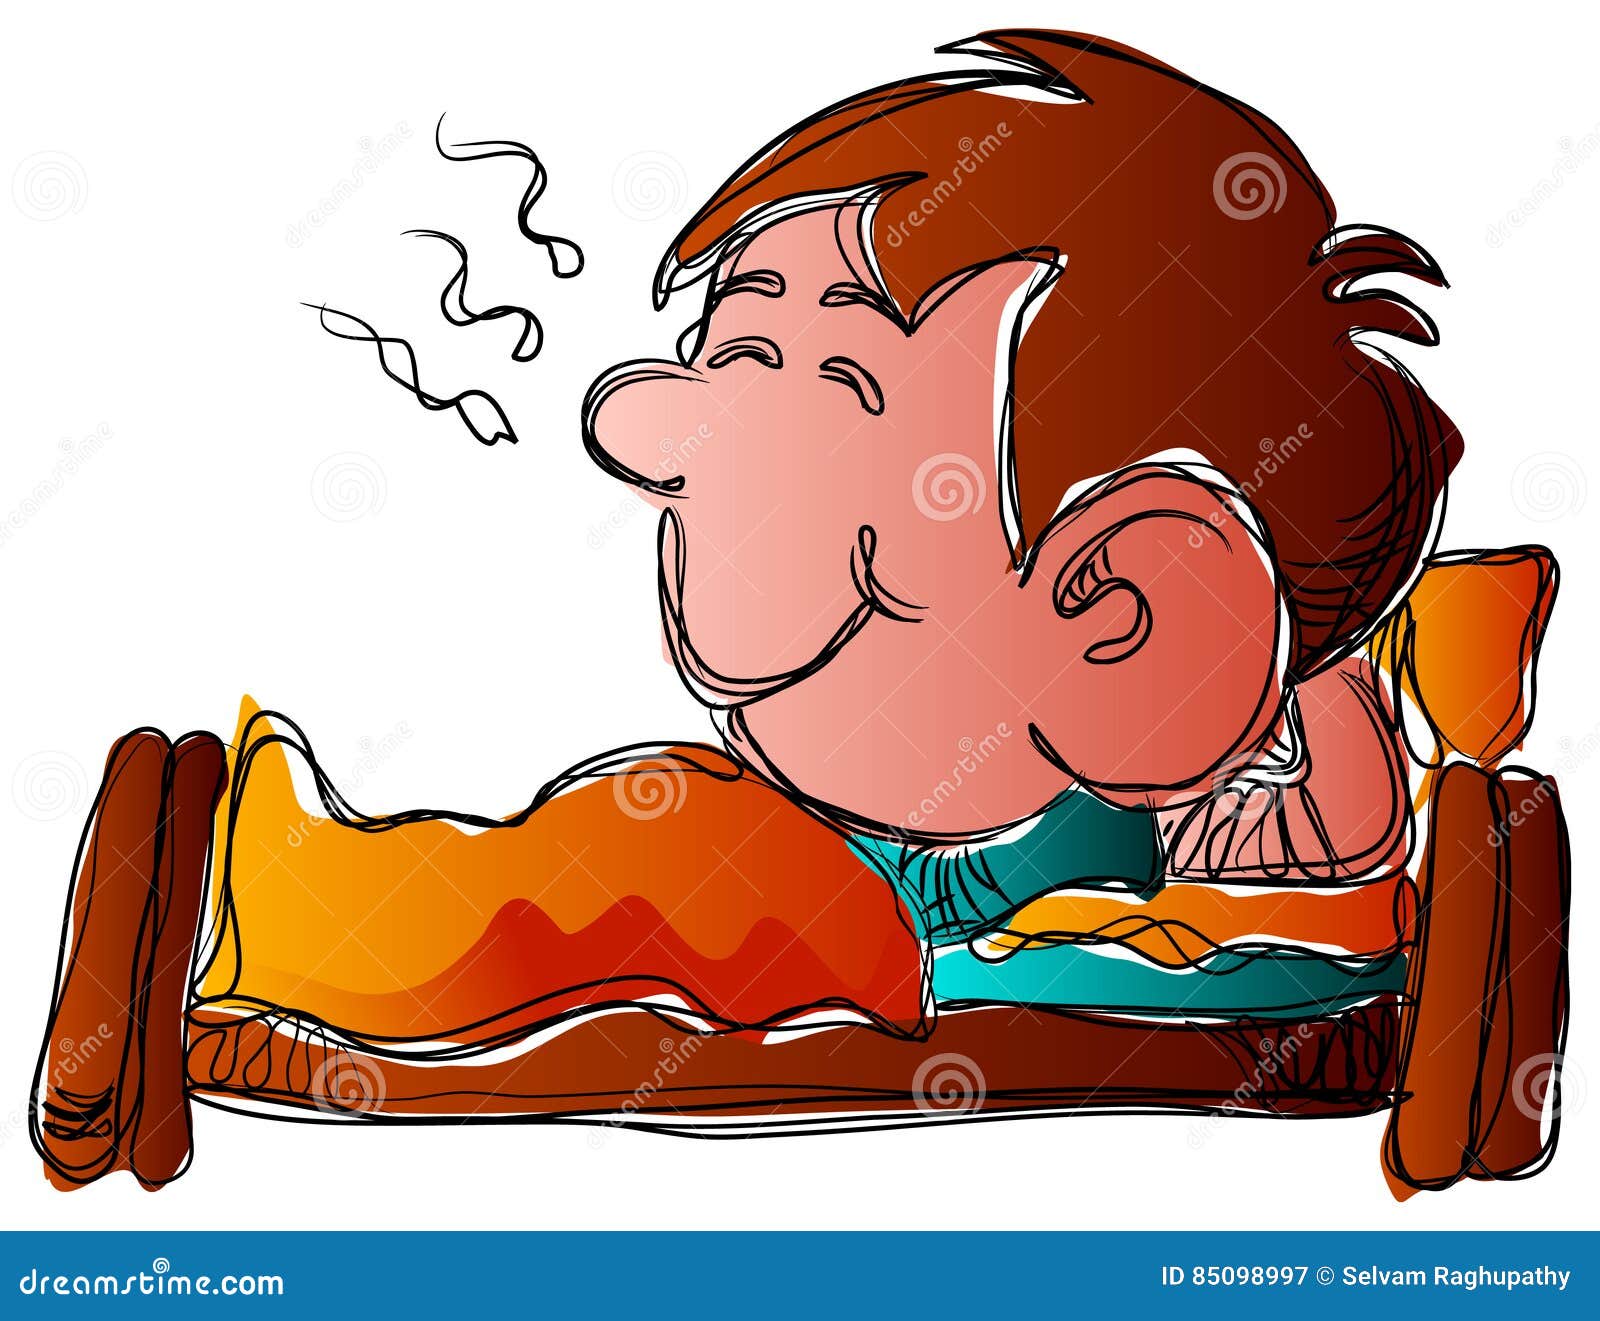 Boy Sleeping on a bed stock vector. Illustration of indoors - 85098997